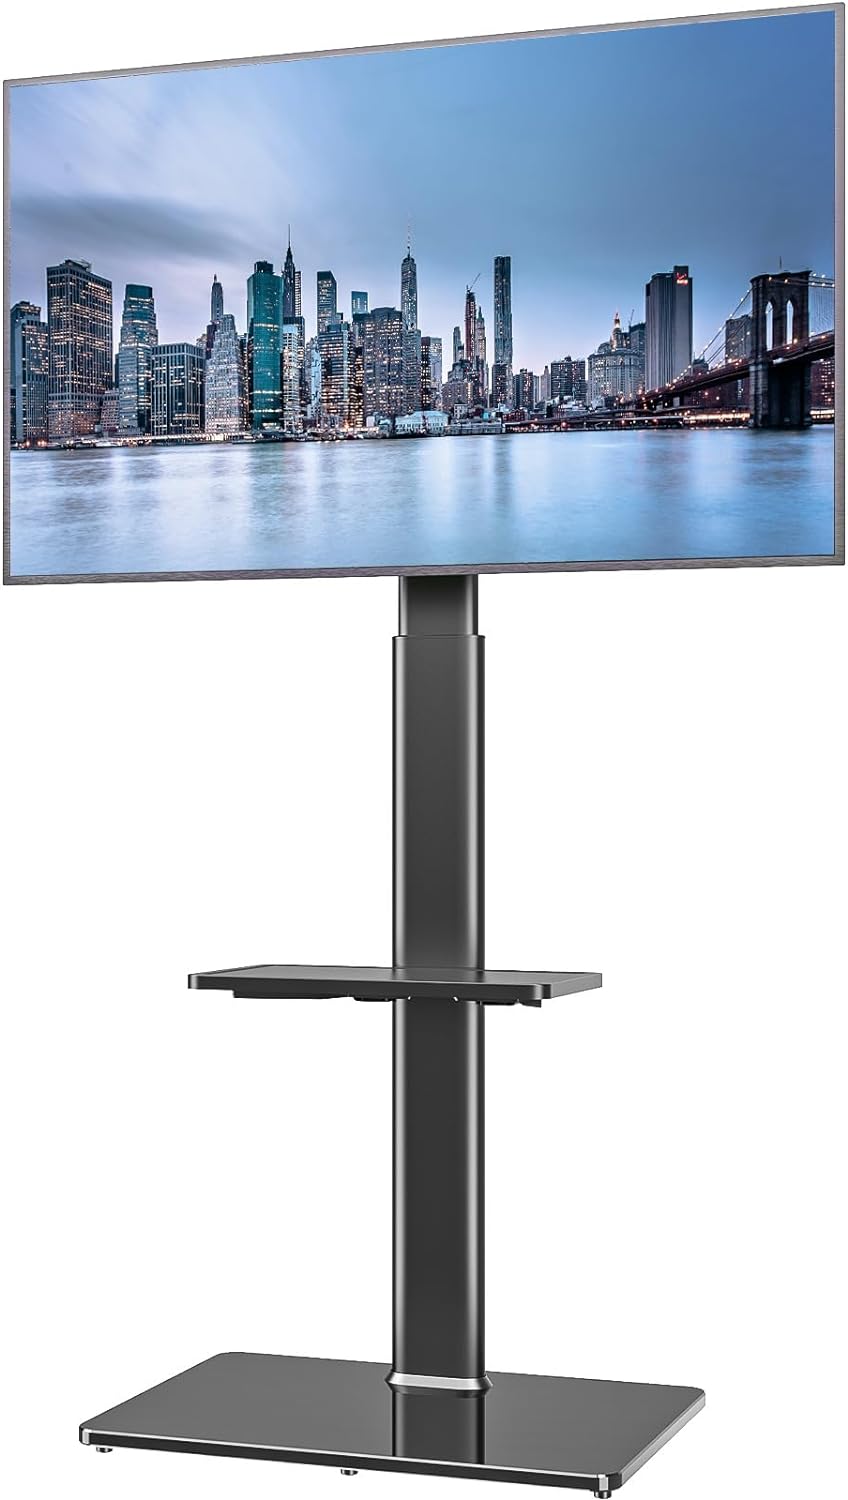 Universal Floor TV Stand with Mount for 19 to 43 inch Flat Screen TV, 100 Degree Swivel,Adjustable Height and Tilt Function, 2 Shelves Space Saving Standing TV Mount for Bedroom Living Room Corner